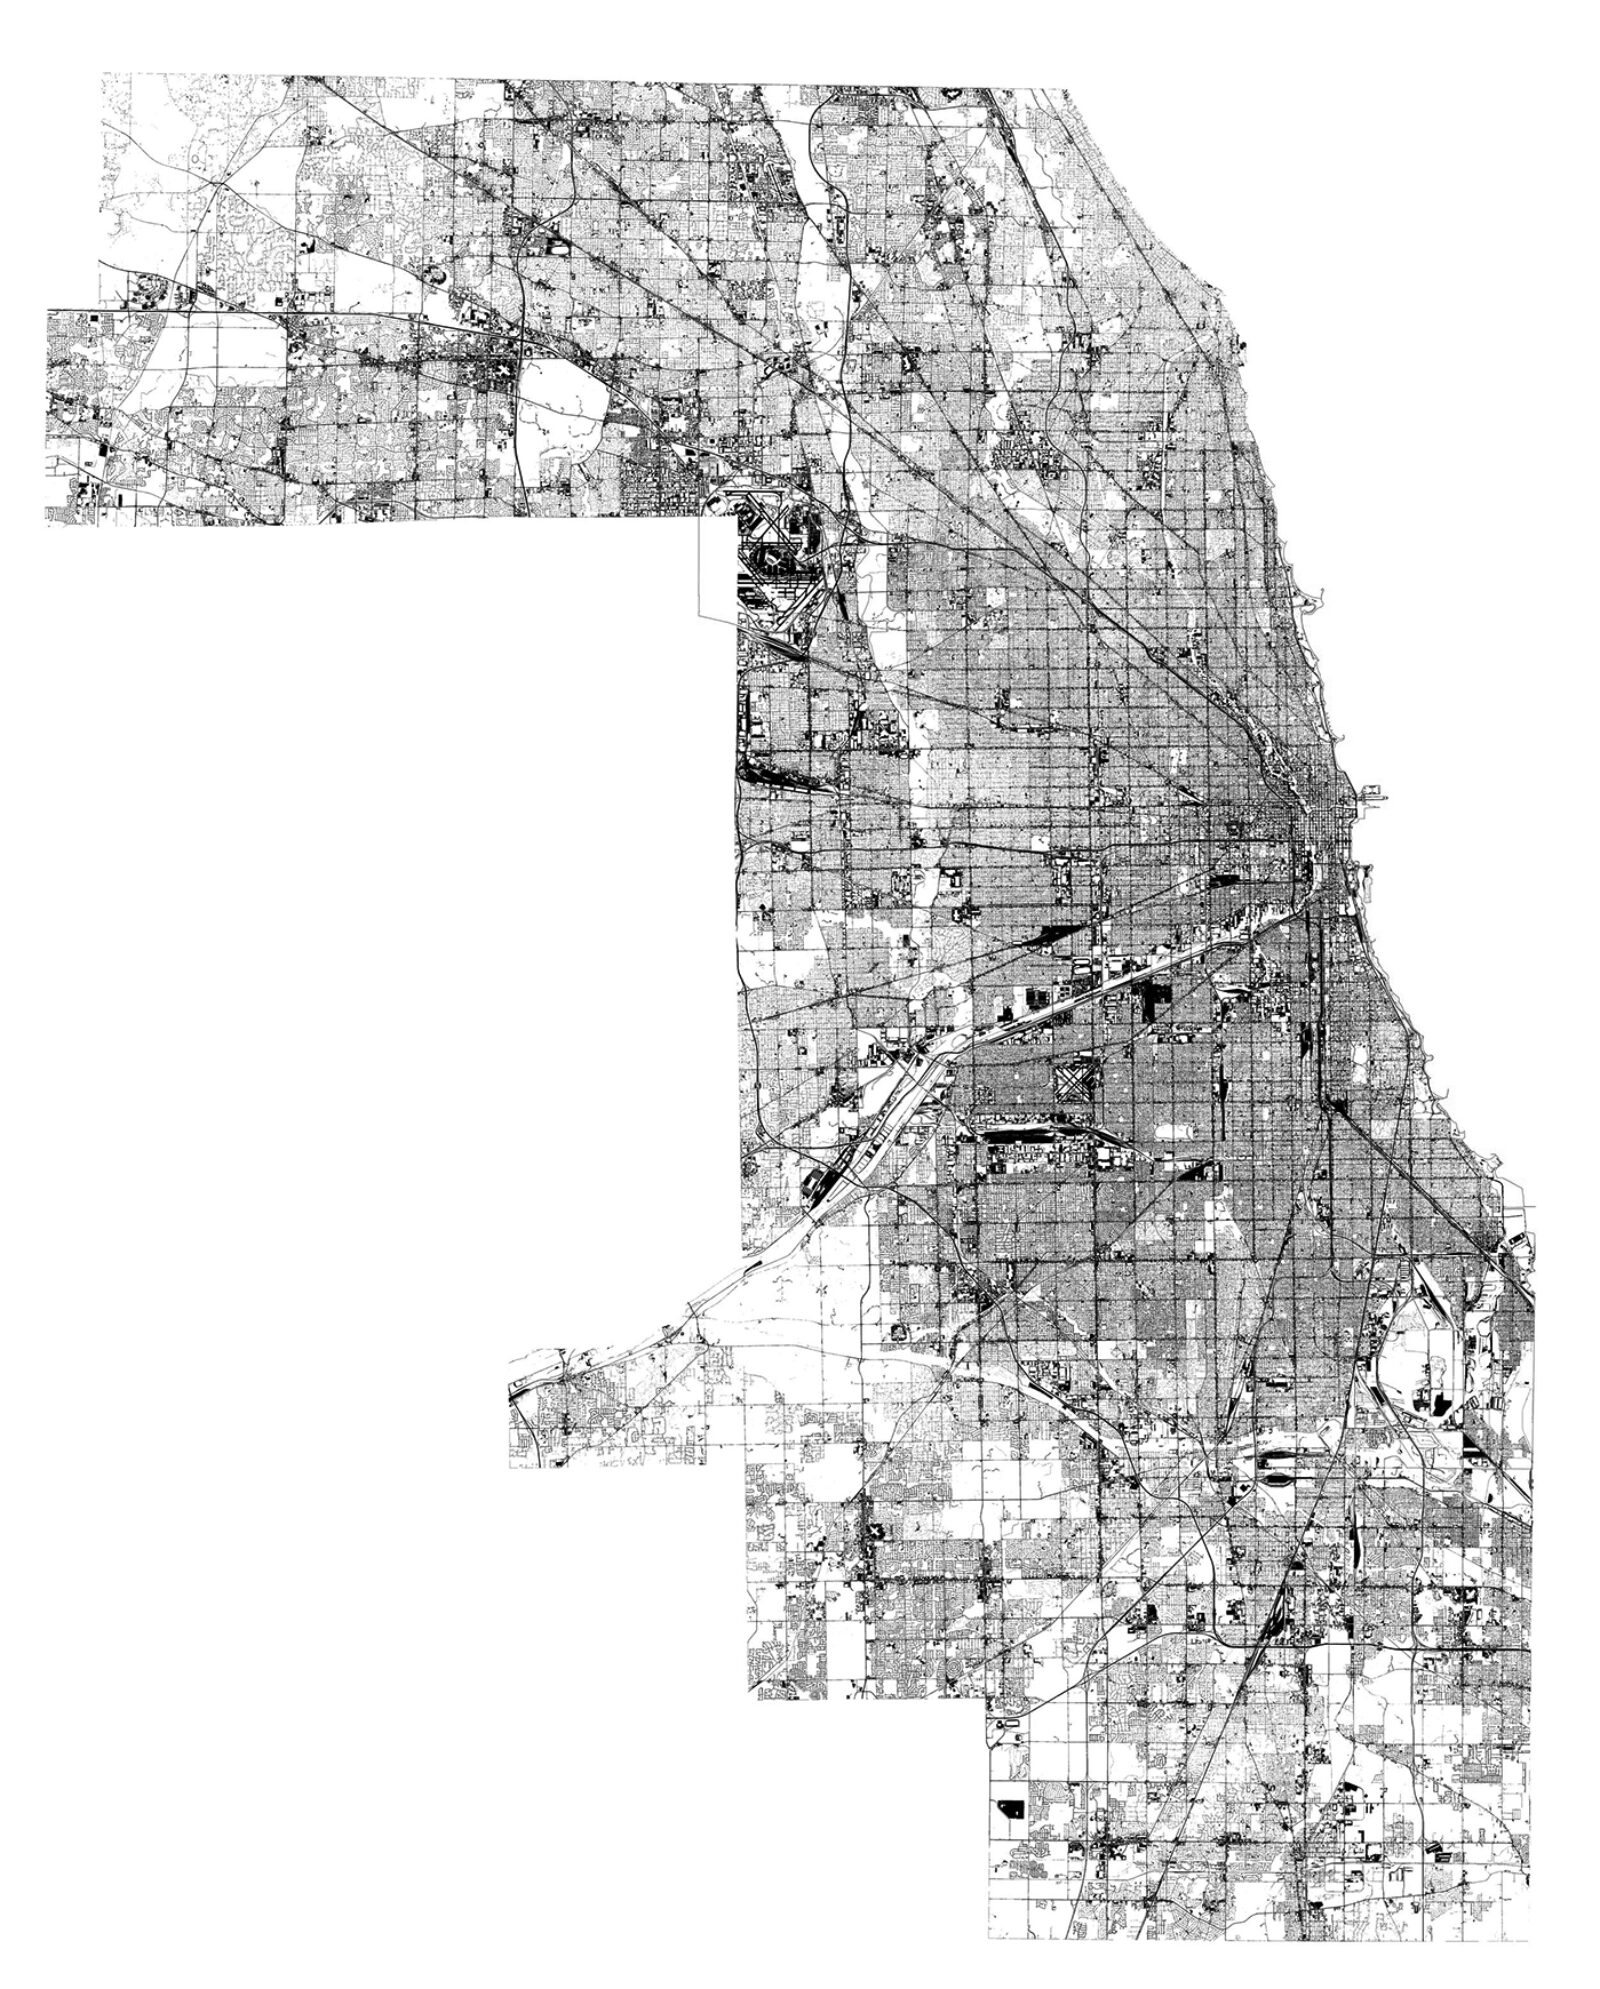 Pavement map of Chicago and Cook County